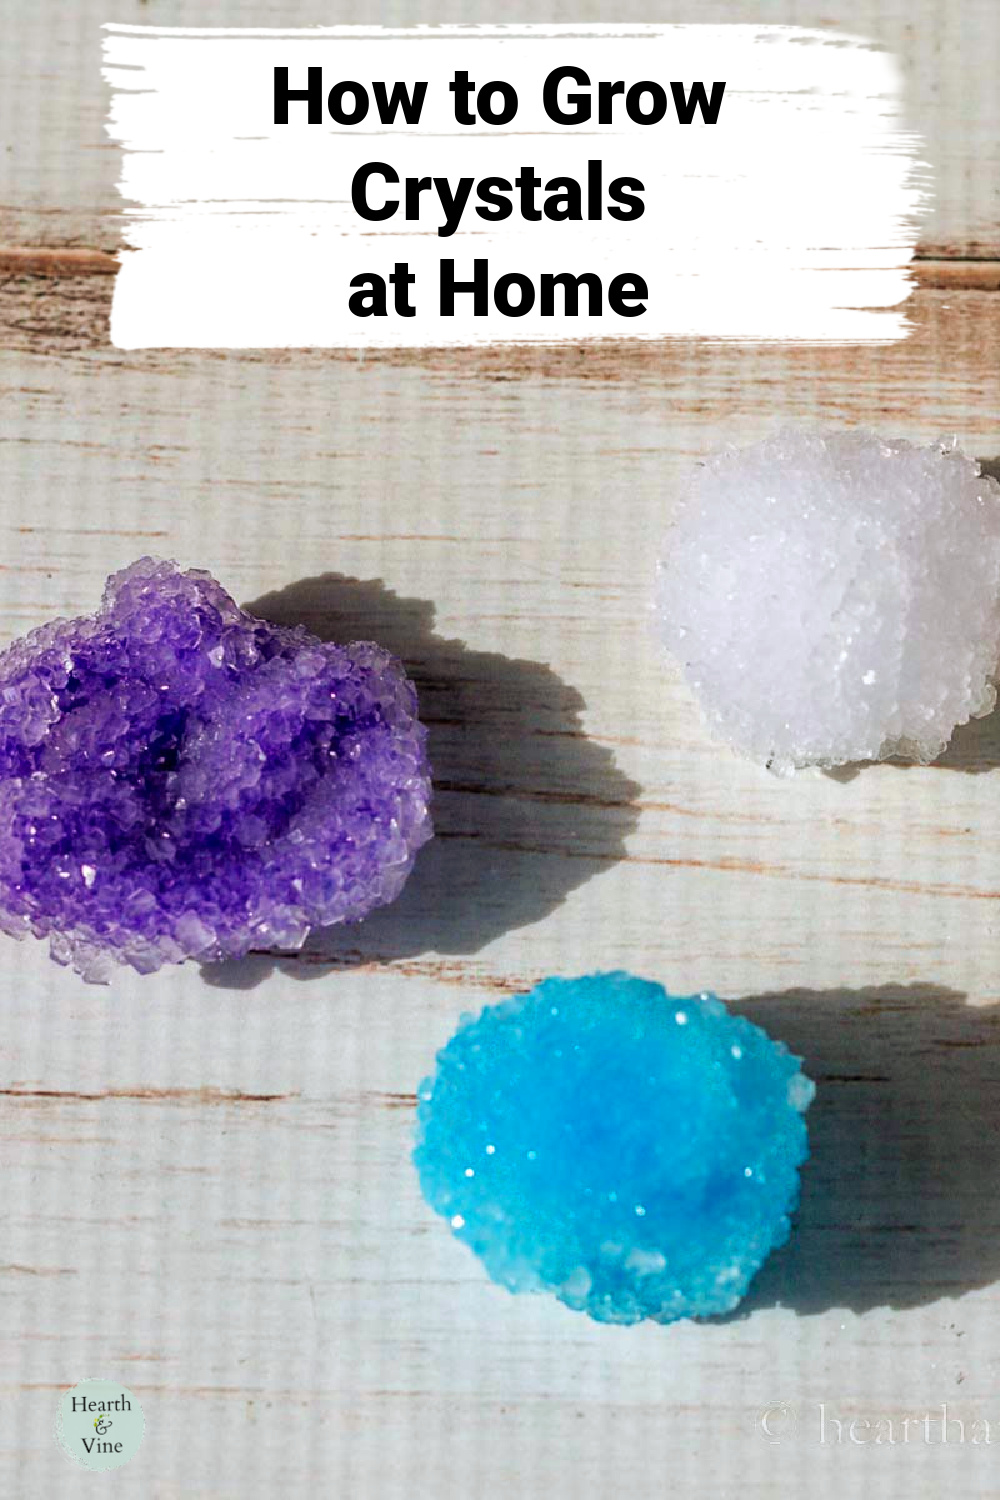 Three homemade borax crystals. One purple, one white and one blue.